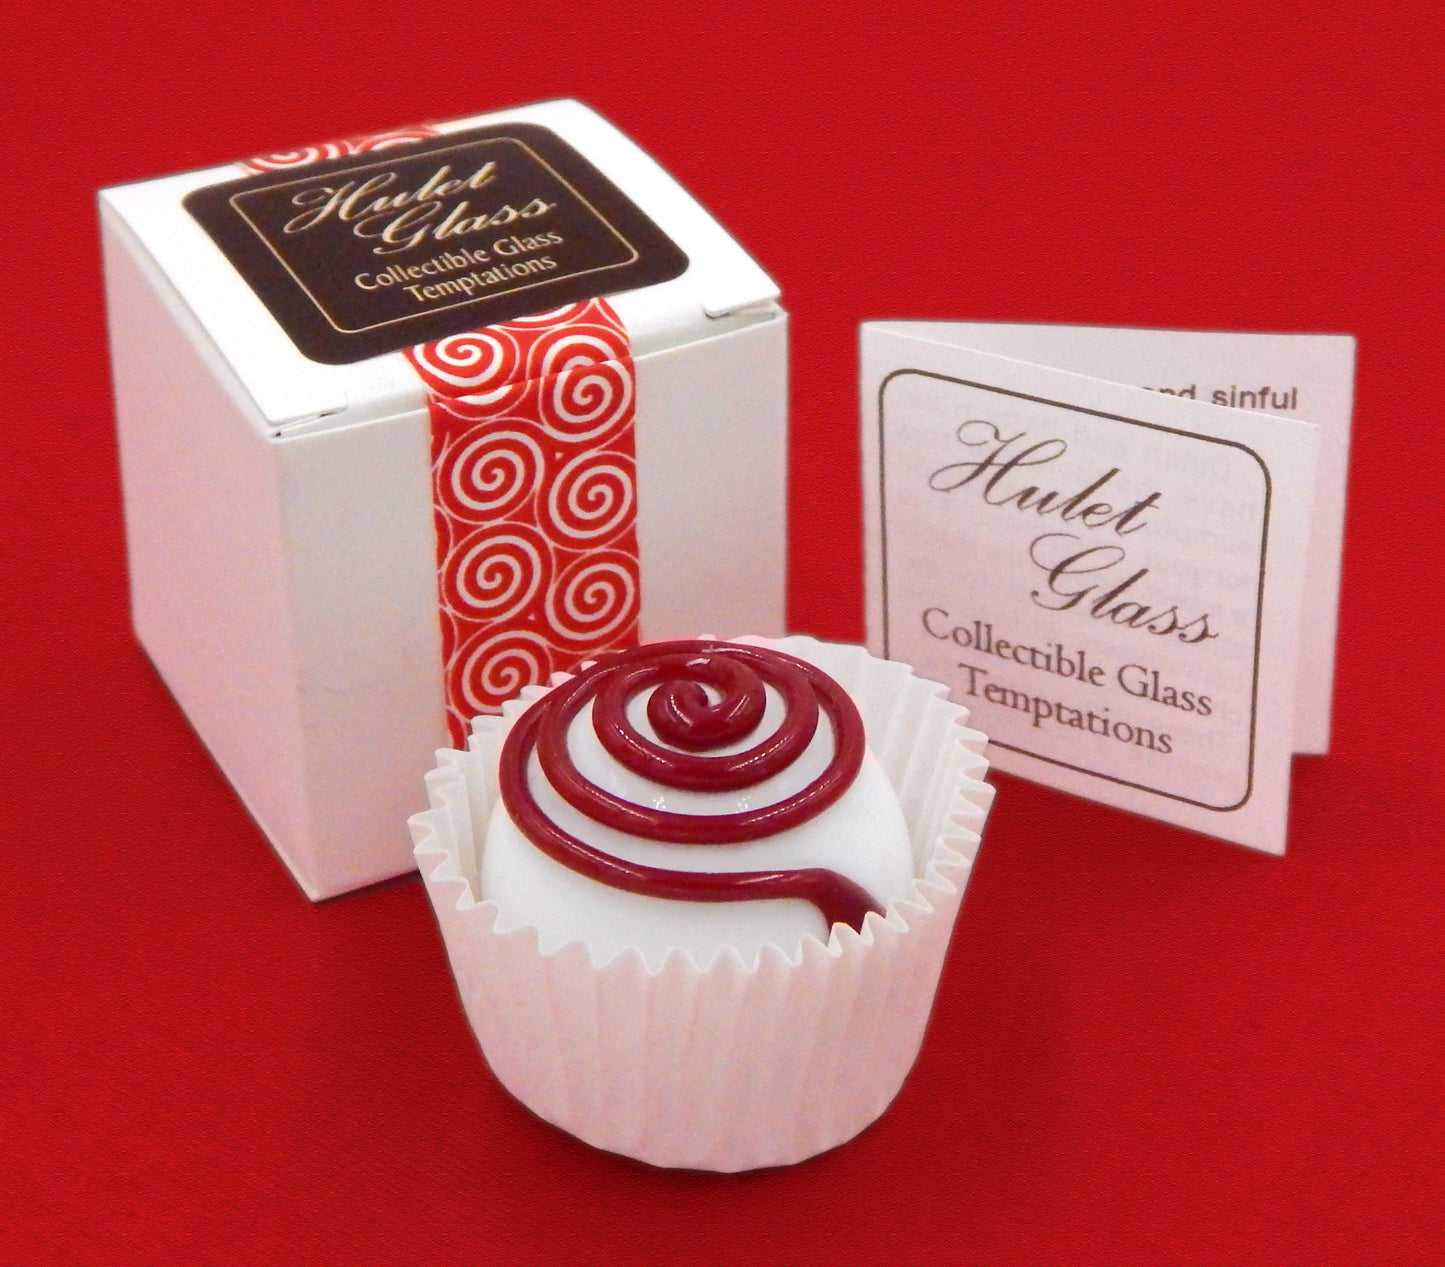 White Chocolate Treat with Cherry Spiral (16-047WH)